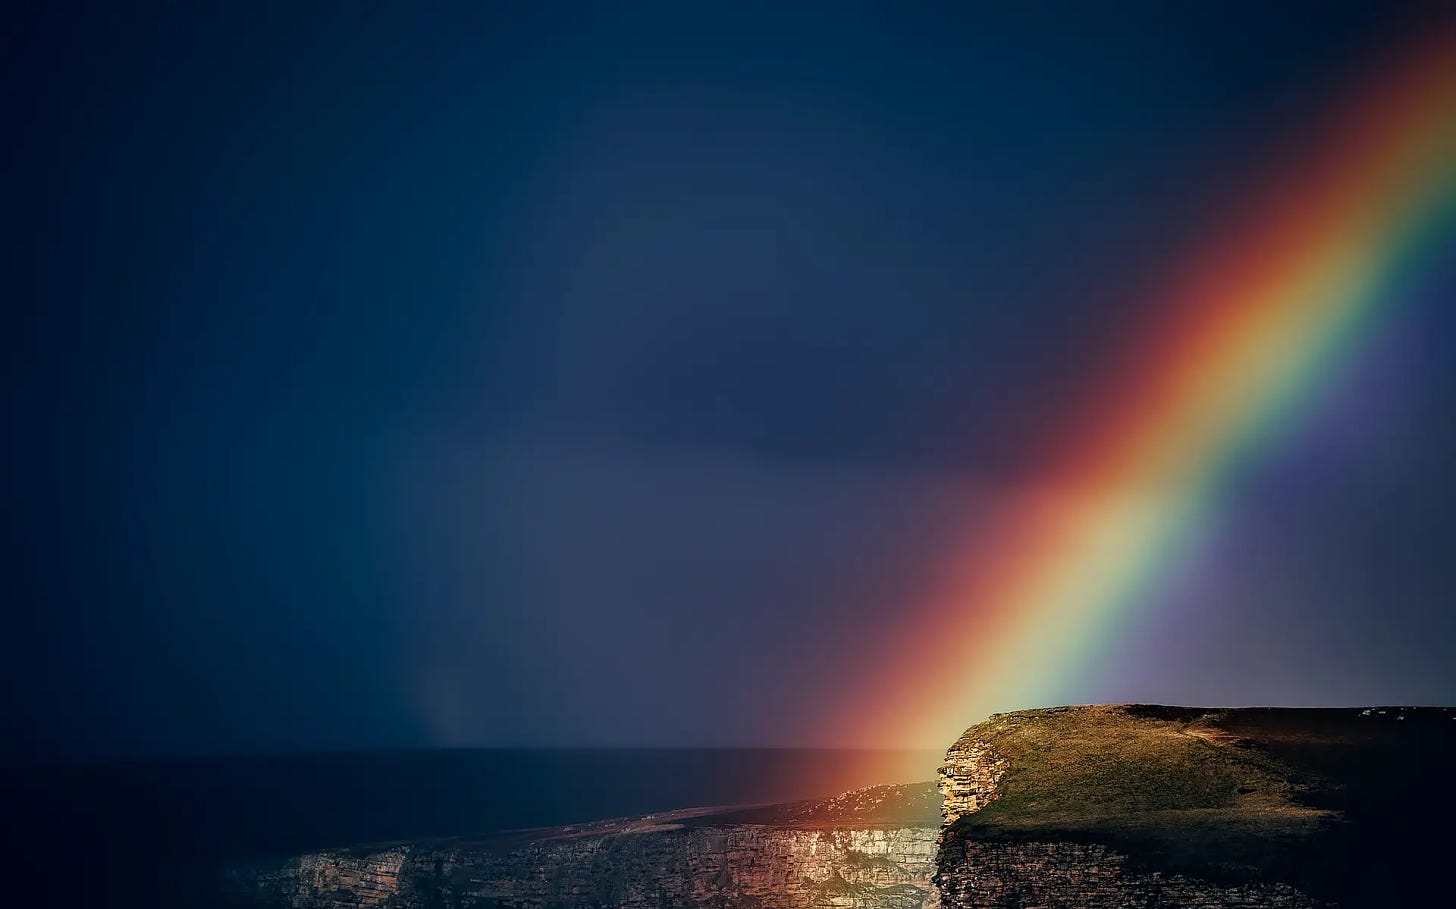 The promise of a rainbow after the storm - As the heart heals